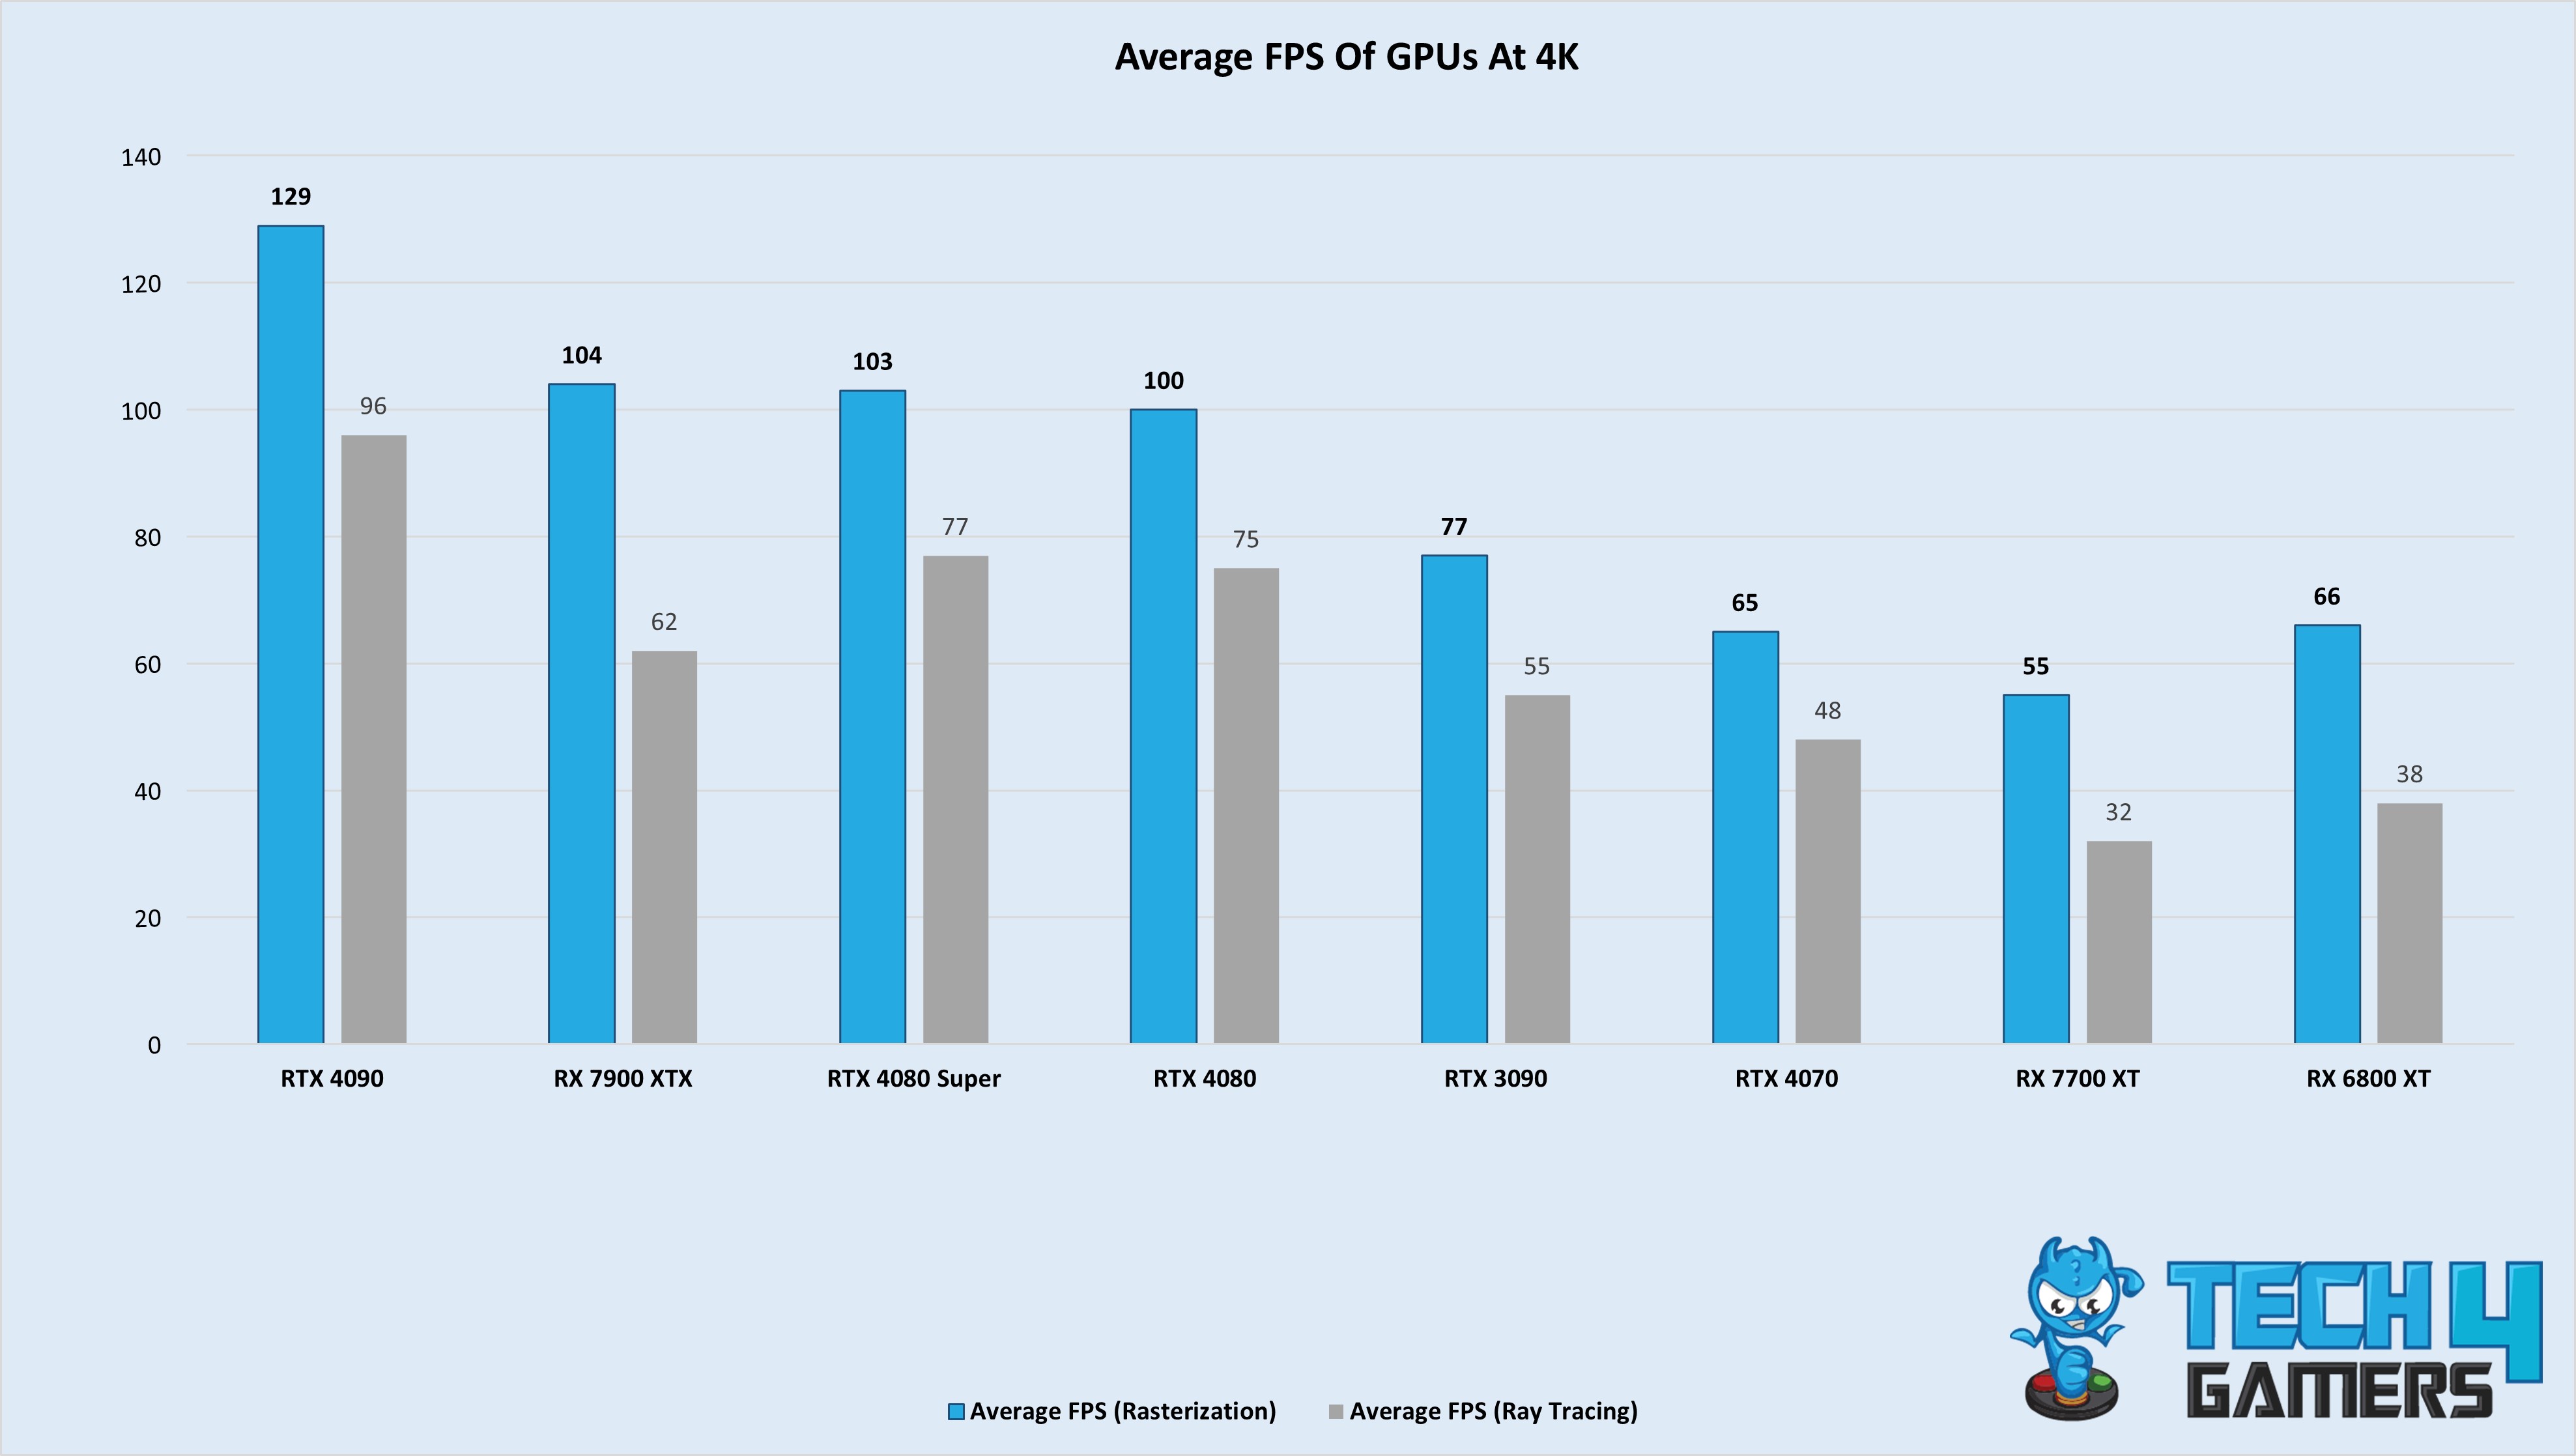 Average rasterization and ray tracing FPS of GPUs at 4K